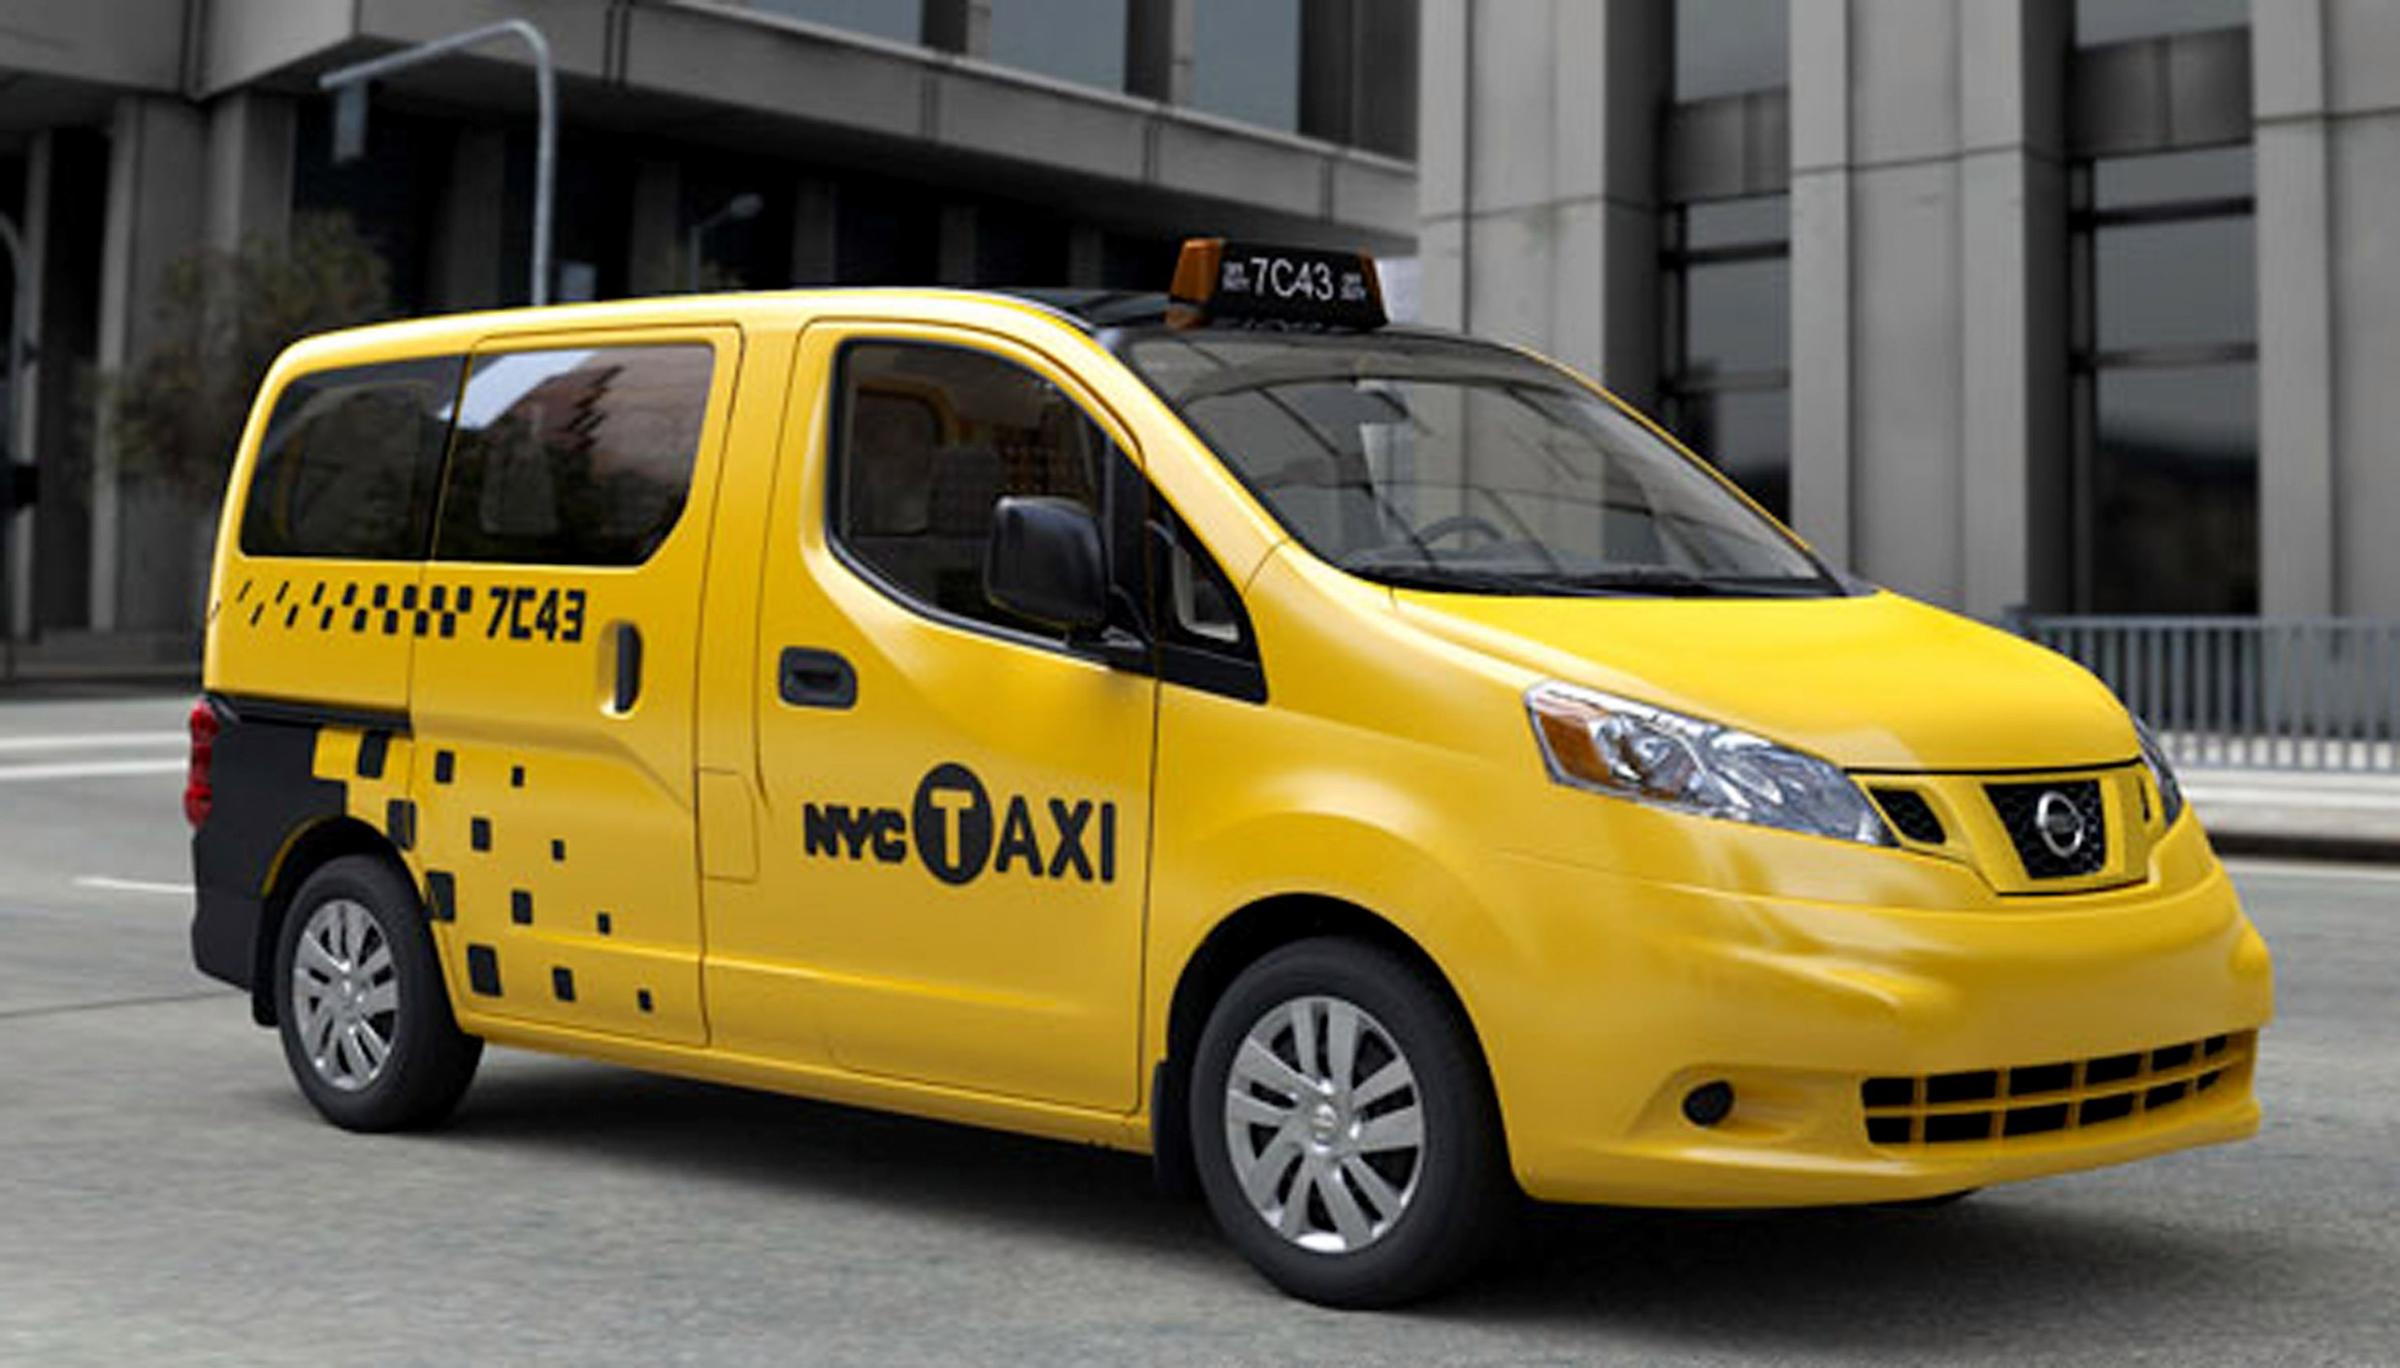 NEW YORK, NY - UNSPECIFIED DATE: In this handout image provided by the City of New York, a Nissan NV200 is seen as a New York City taxi cab in New York City. The Taxi and Limousine Commission along with New York City Mayor Michael Bloomberg annouced the Nissan NV200 designed by Nissan North America, Inc., has been chosen as the winner of the Taxi of Tomorrow competition and will become the City’s exclusive taxicab for a decade. (Photo by City of New York via Getty Images)